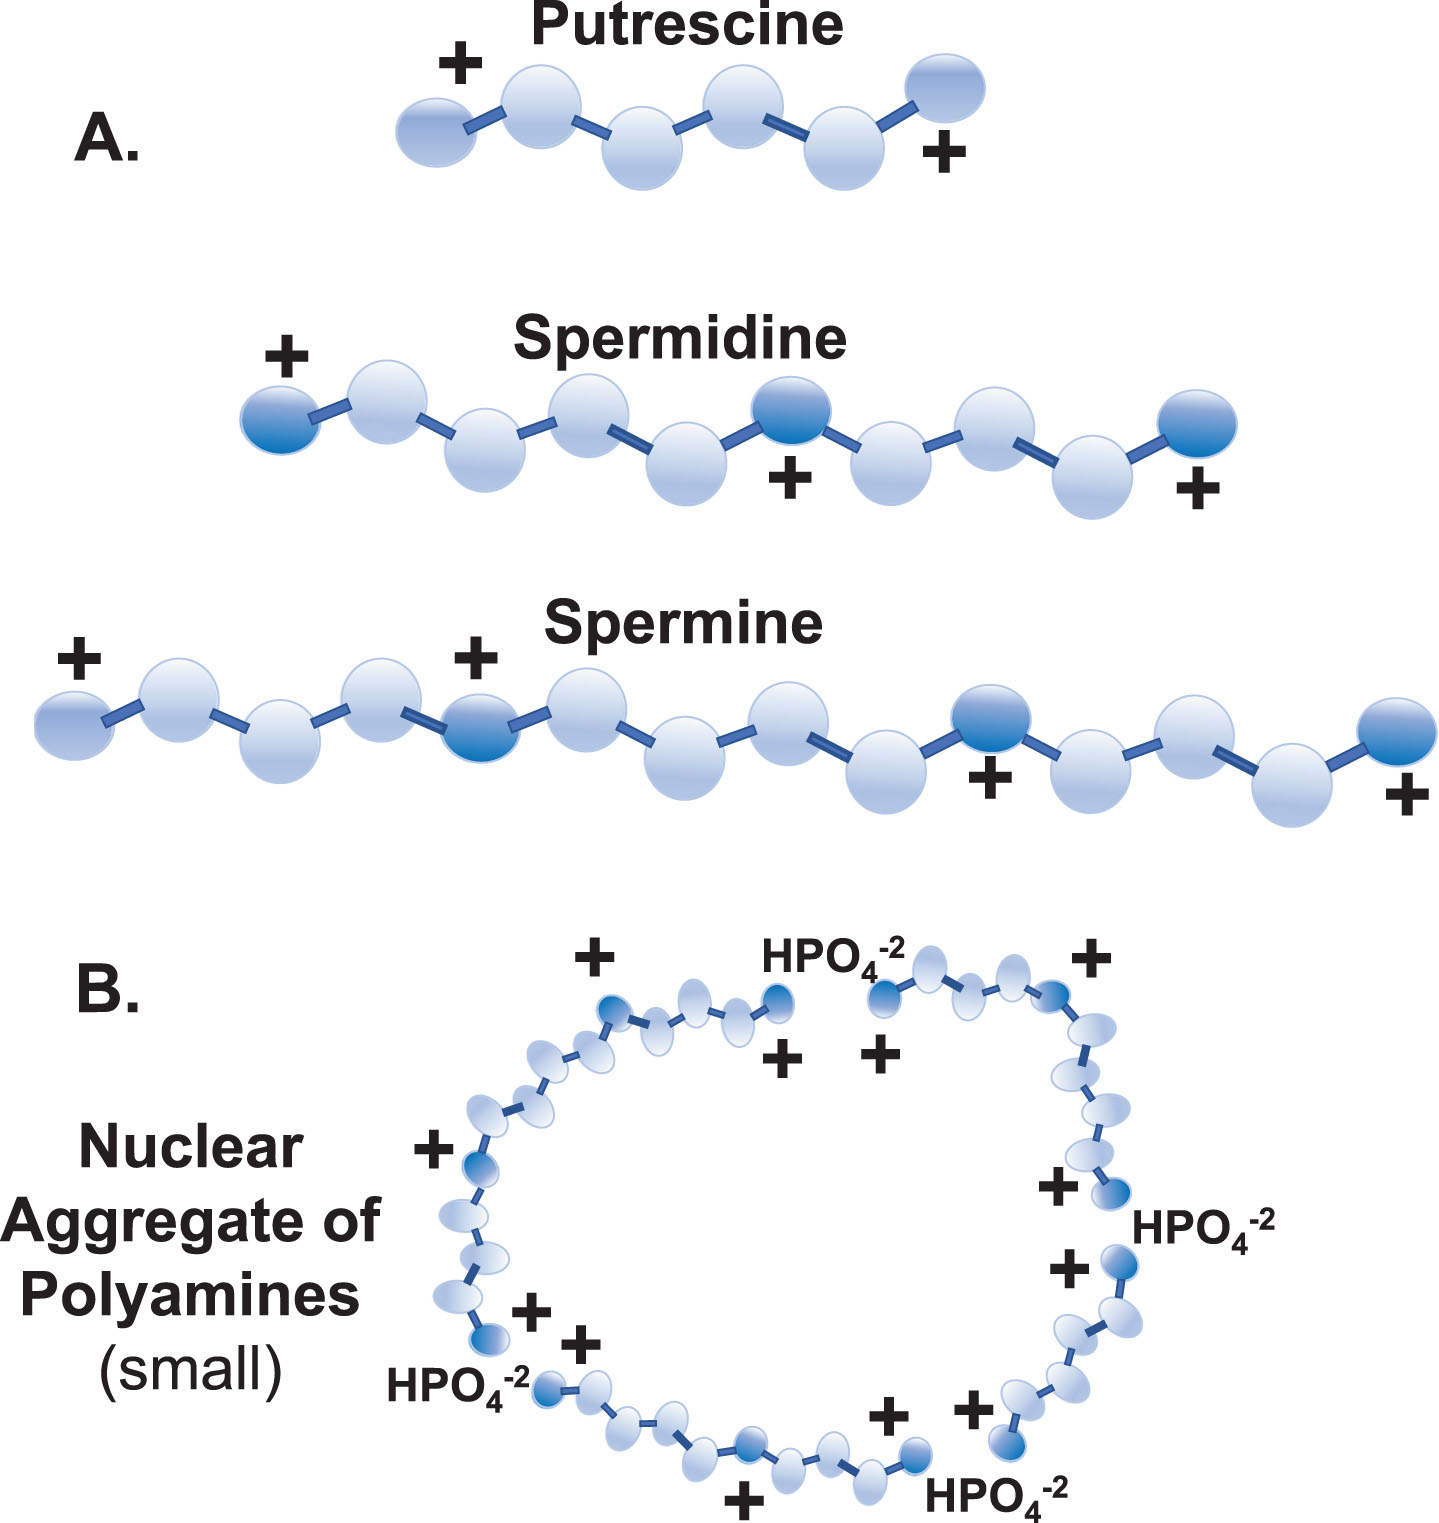 Polyamines. A) The main polyamines of concern in this discussion are putrescine, spermidine, and spermine. Their flexibility (all single bonds), high cationic charges at physiological pH (+2,+3,+4, respectively), and length (∼8 Å, ∼12 Å, ∼16 Å, respectively) give the polyamines unique characteristics beneficial in important interactions with larger anions, such as in folding of RNA transcripts, stabilizing chromatin, and modulating ion channels. (Darker spheres are nitrogen atoms, white spheres are carbon atoms, and hydrogens are not shown. Also, the acetylated forms of spermidine and spermine are not shown.) B) Depiction of a small nuclear aggregate of polyamines (NAP). Note that the NAP has an overall cationic charge which could associate it with anions (e.g., DNA). (Medium and large NAPs are not shown.) Putrescine (typically at only trace amounts) is a limiting factor in appearance of NAPs.